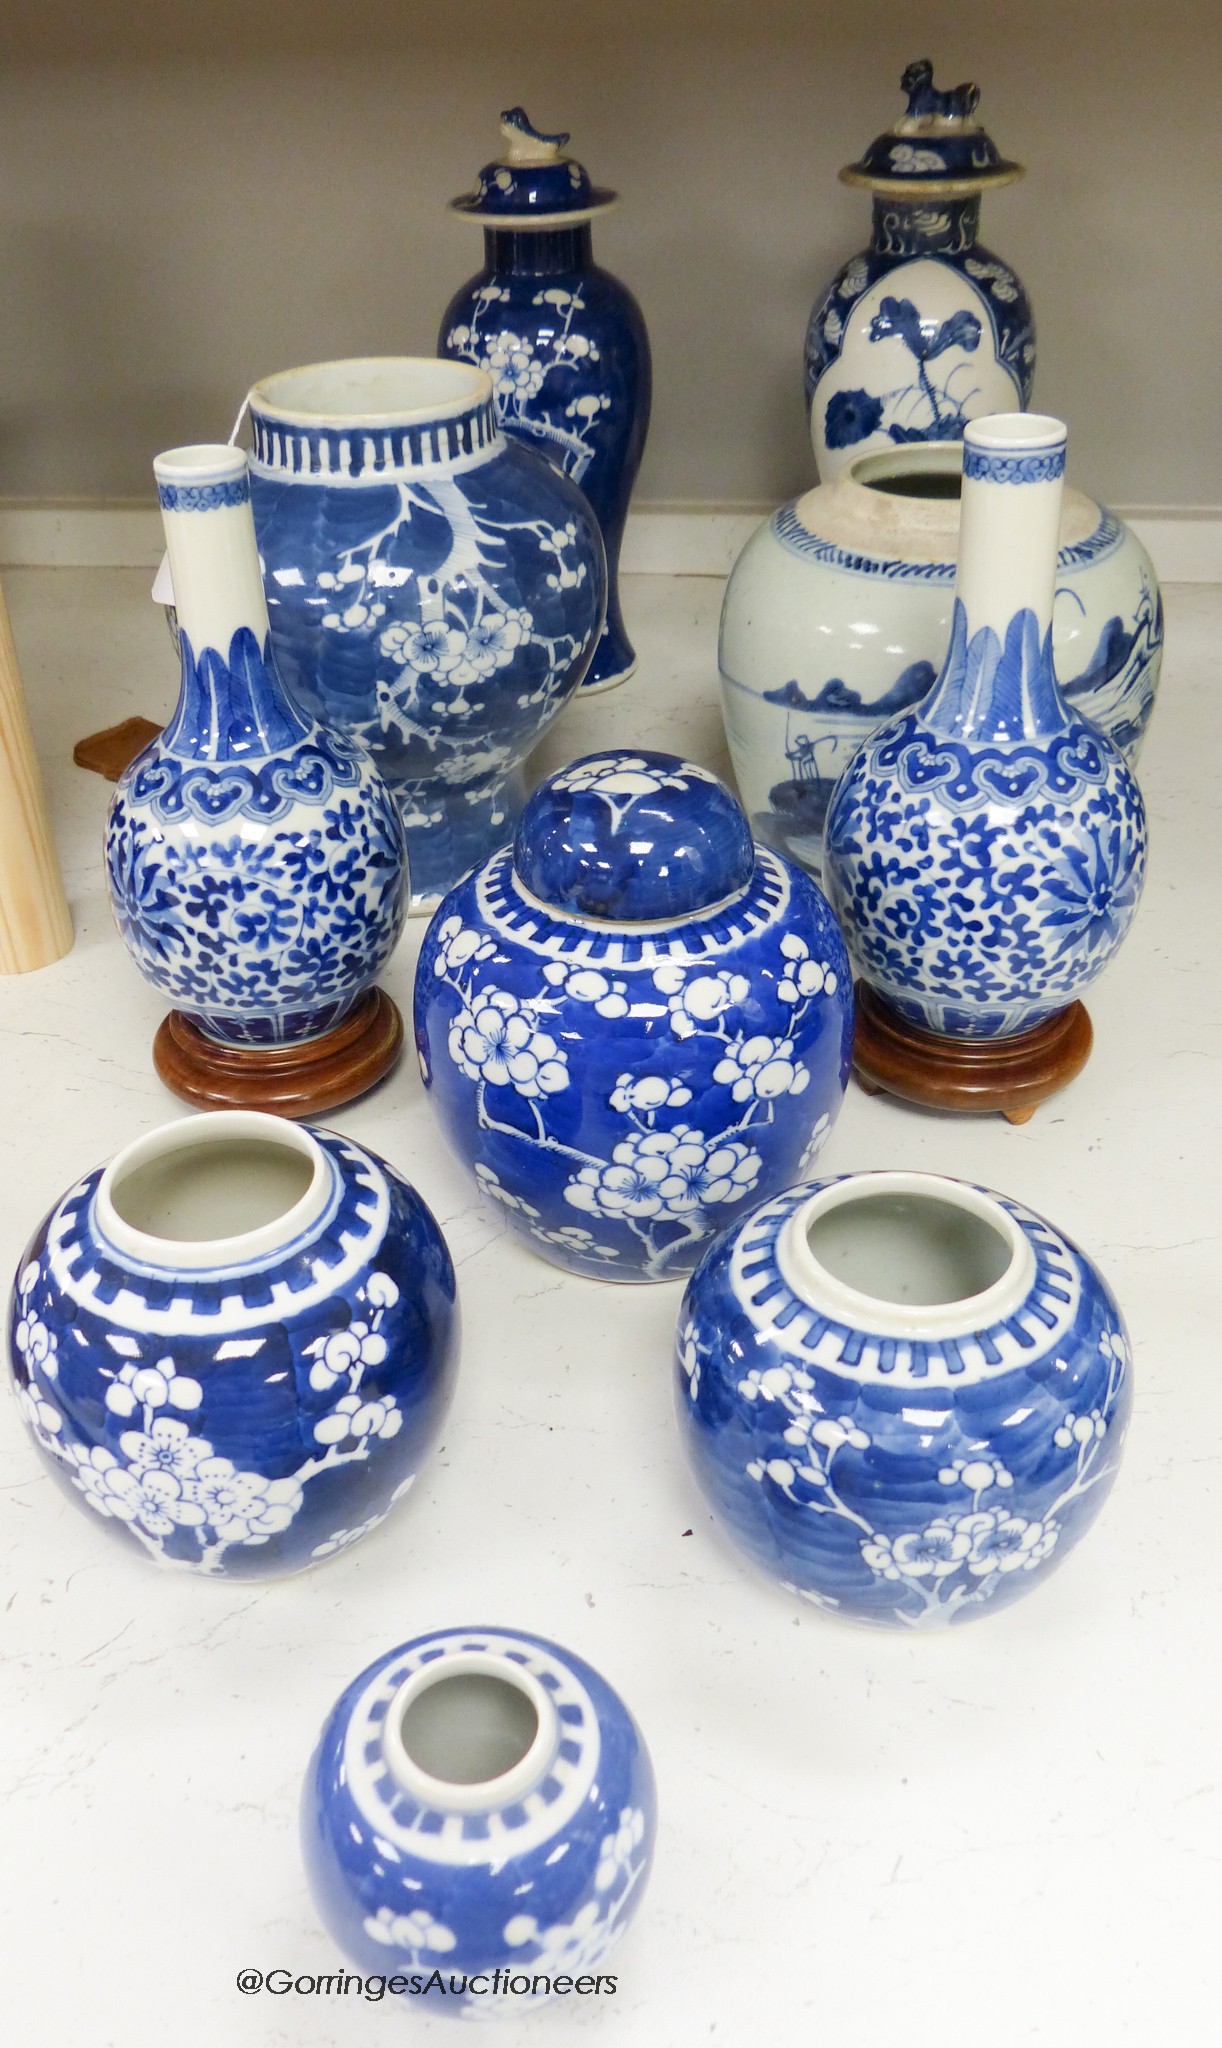 Ten 19th / 20th century Chinese blue and white vases and jars, tallest 29cm including cover